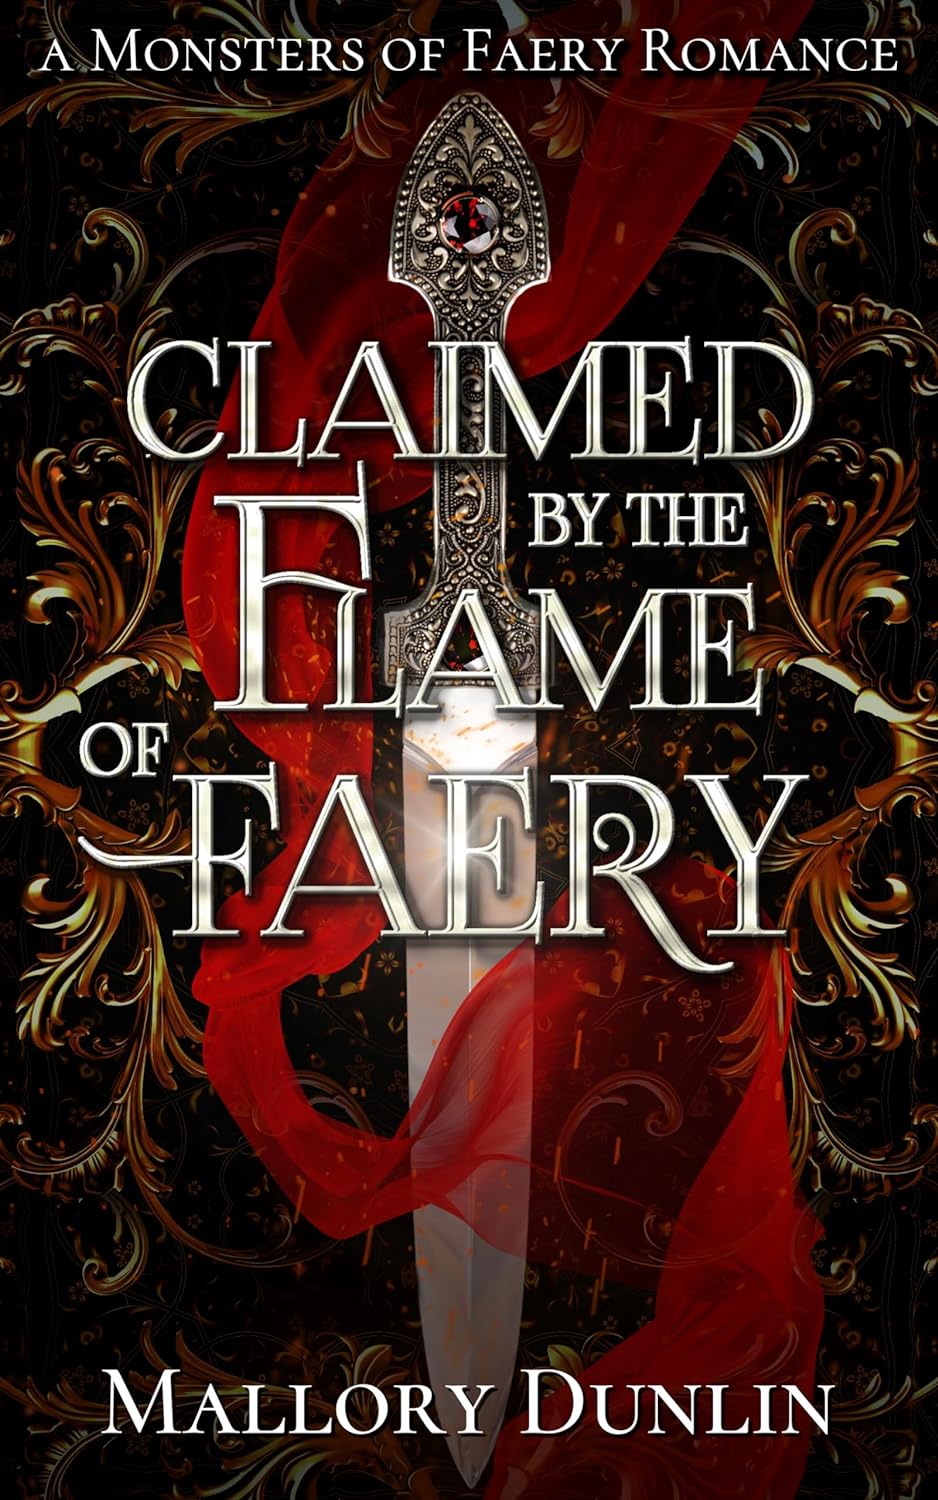 Claimed by the Flame of Faery by Mallory Dunlin